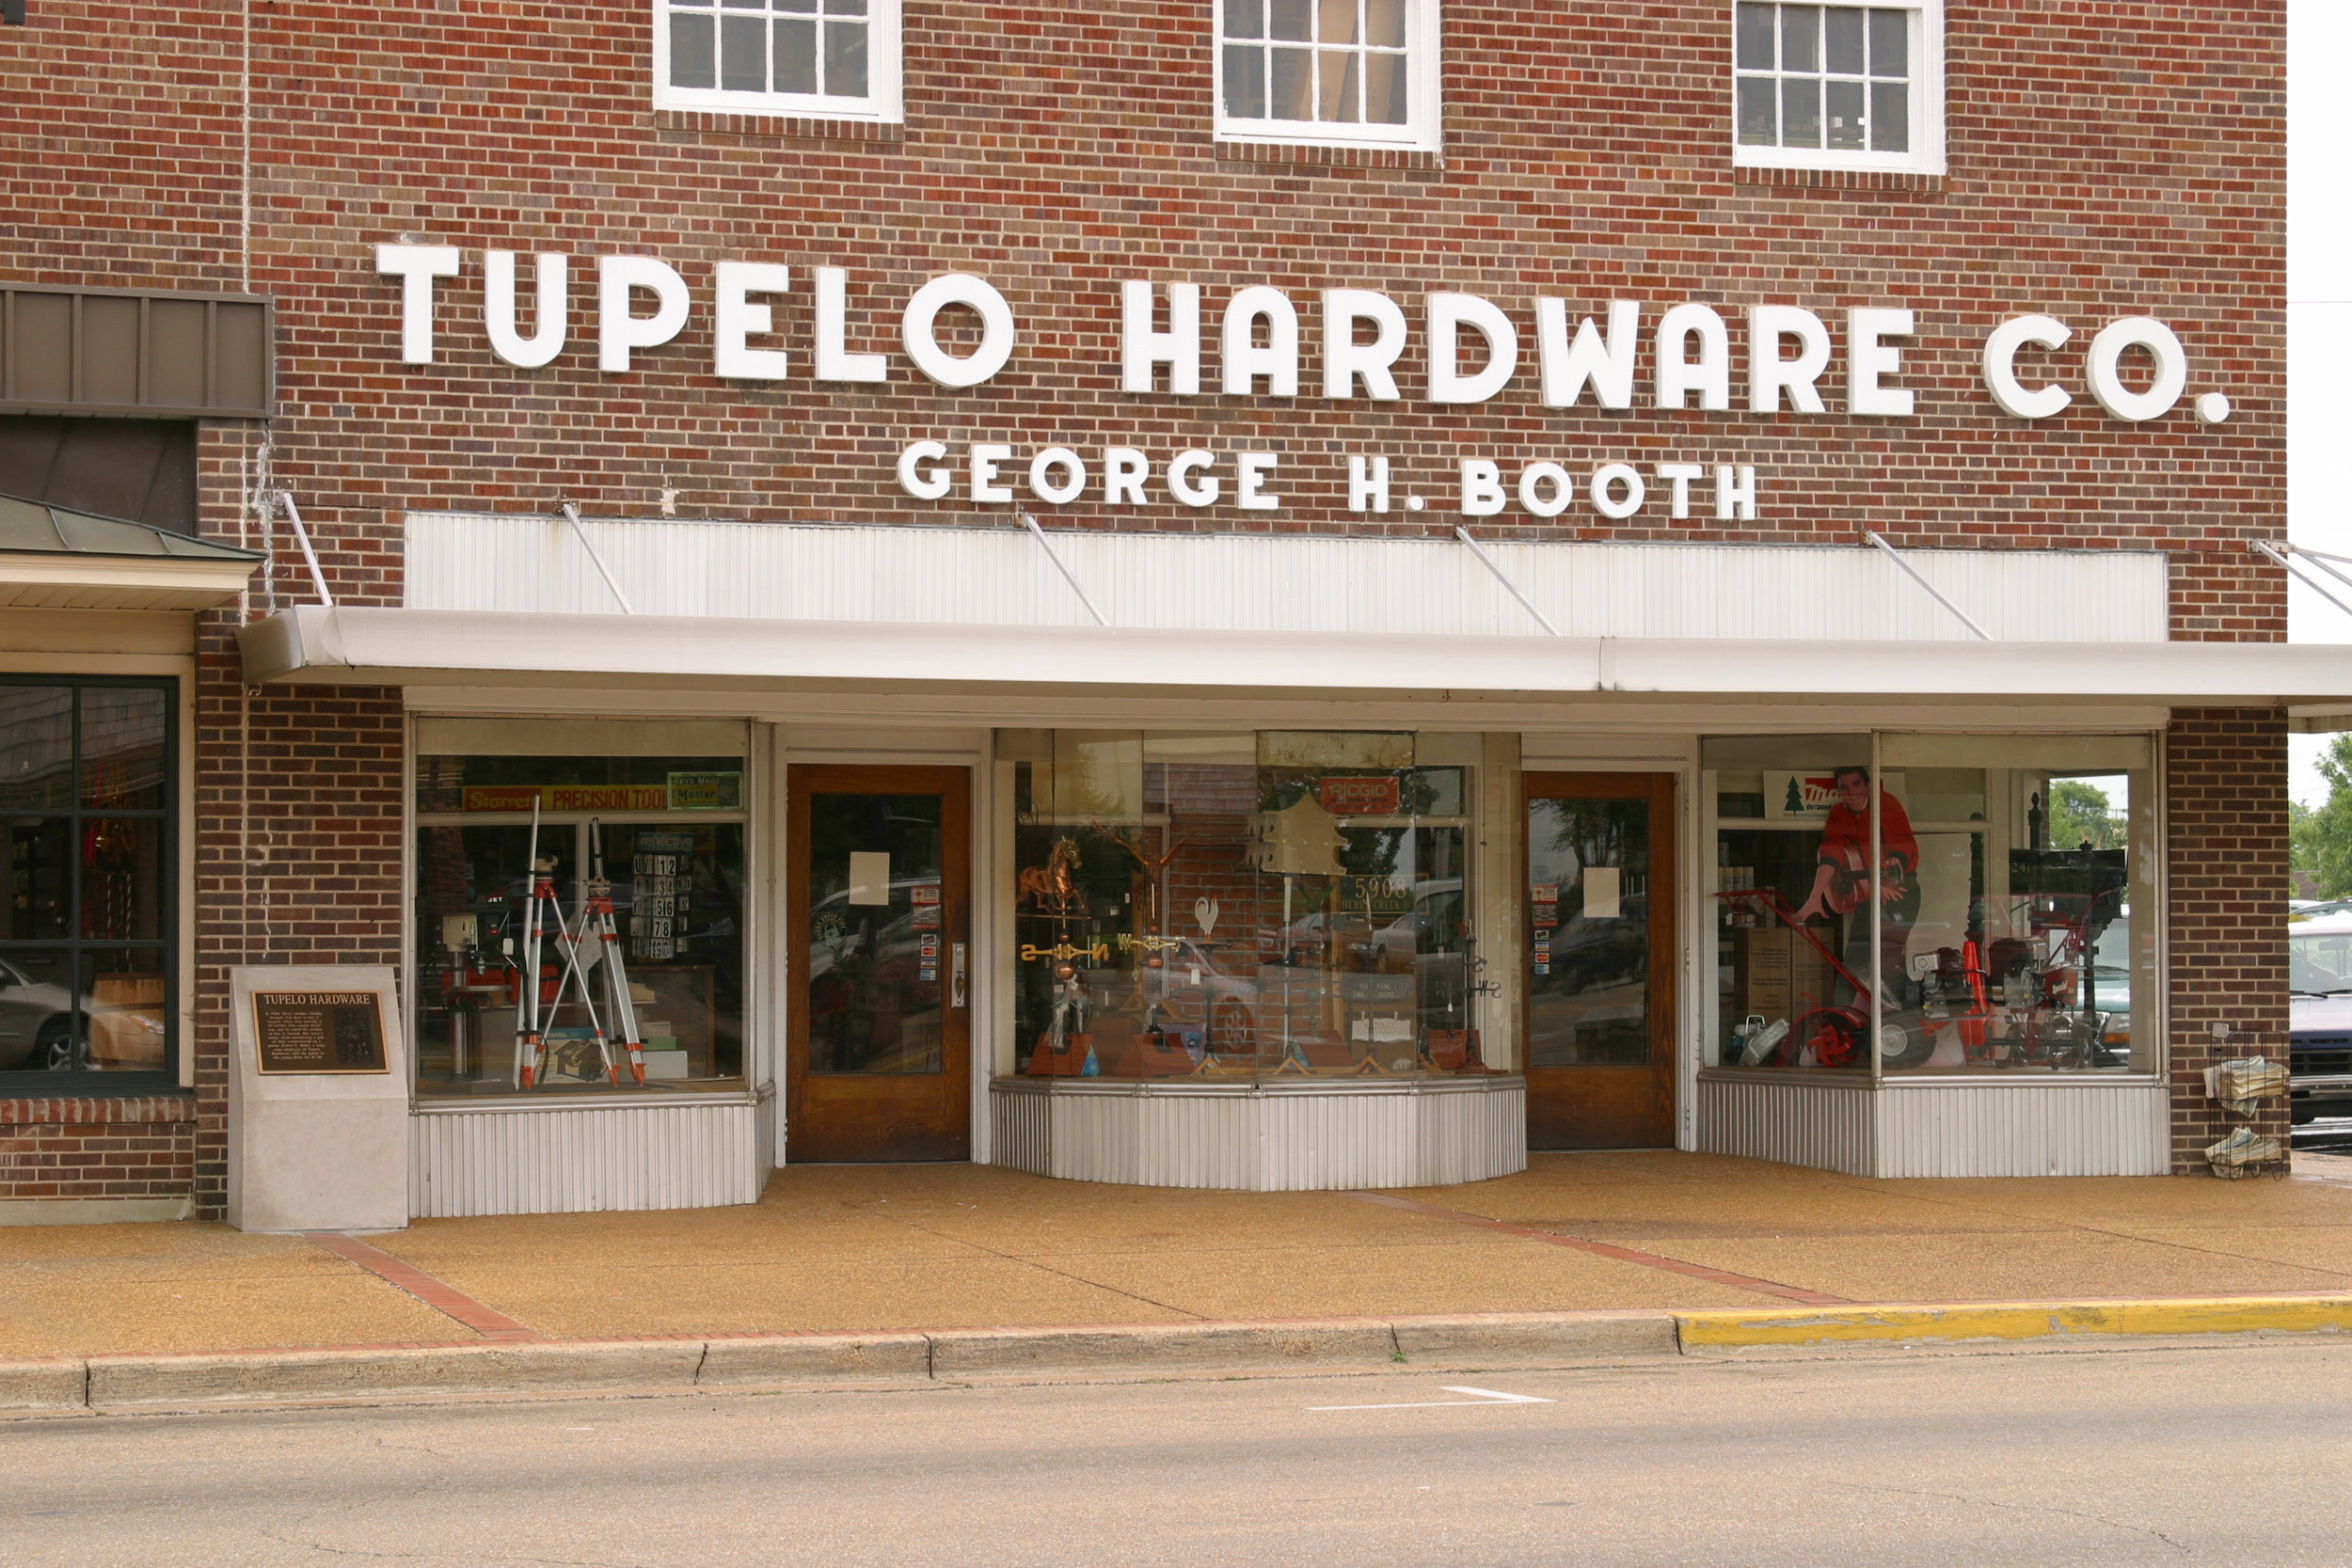  Tupelo Hardware Co., where Elvis purchased his first guitar 